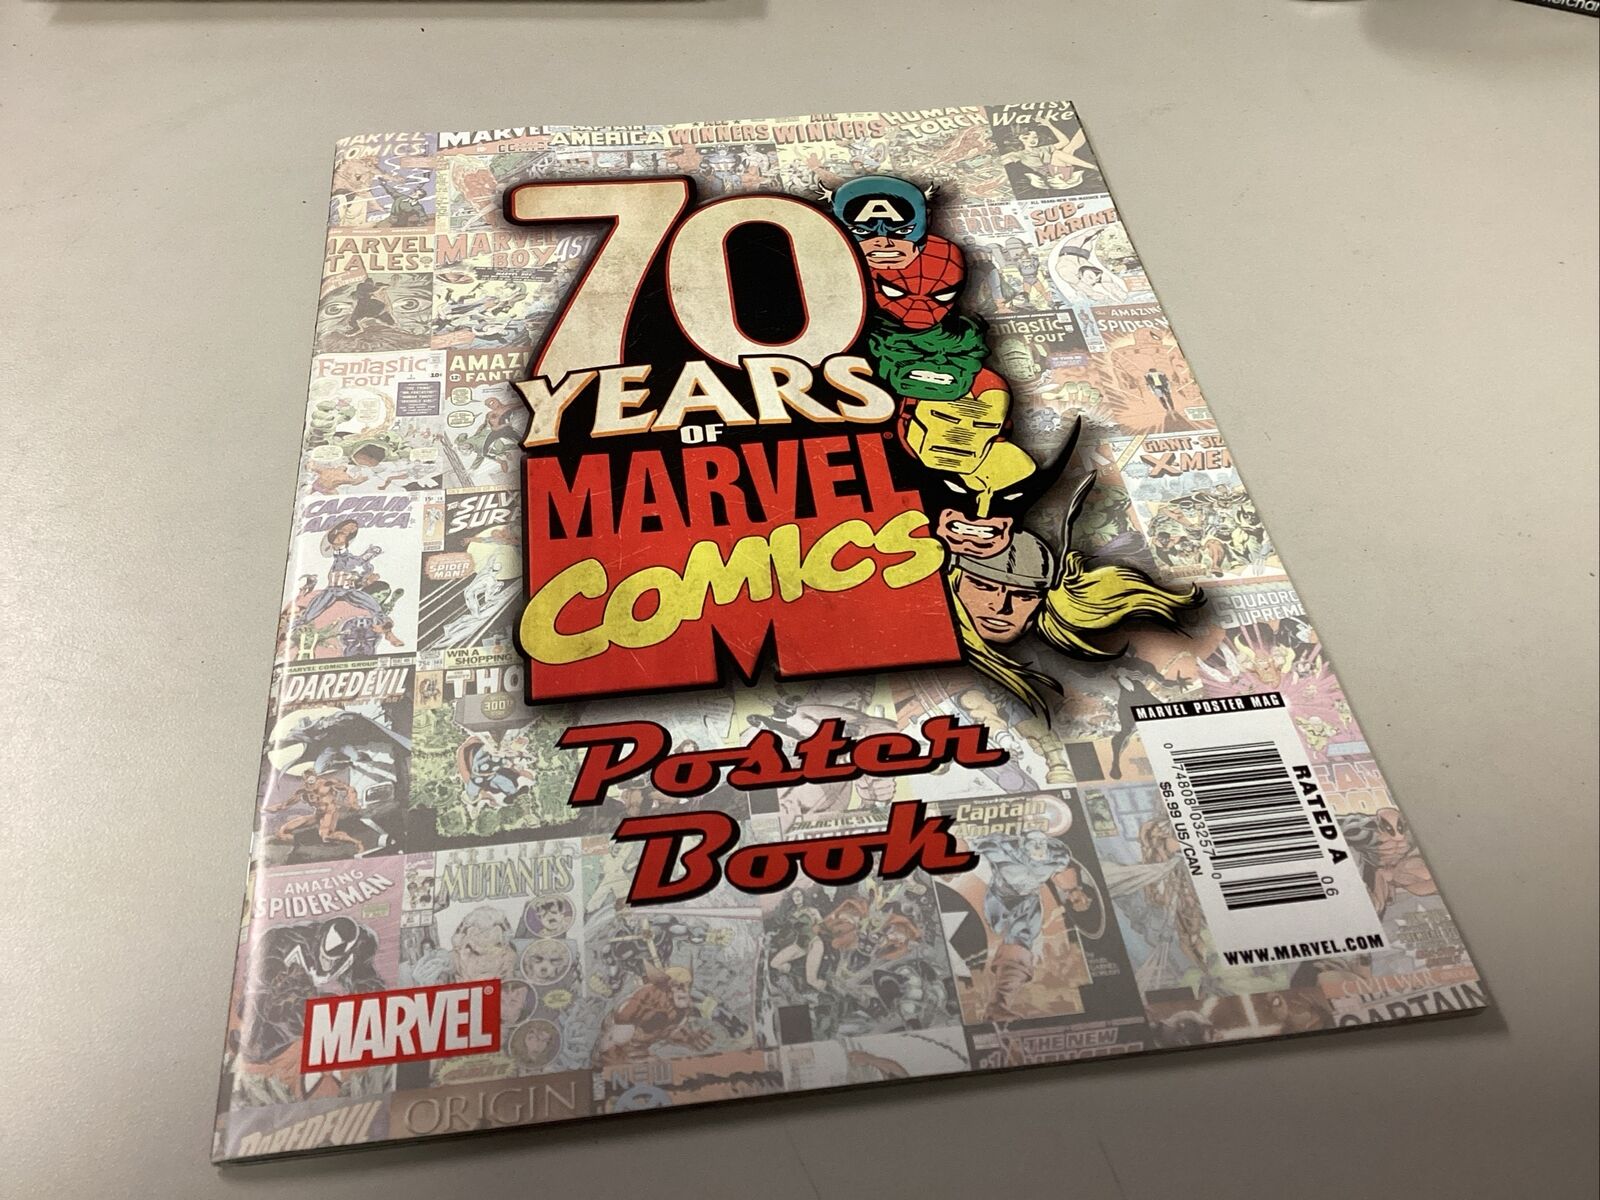 2009 70 YEARS OF MARVEL POSTER BOOK Mint Copy Unread Great Posters Of Key Issues